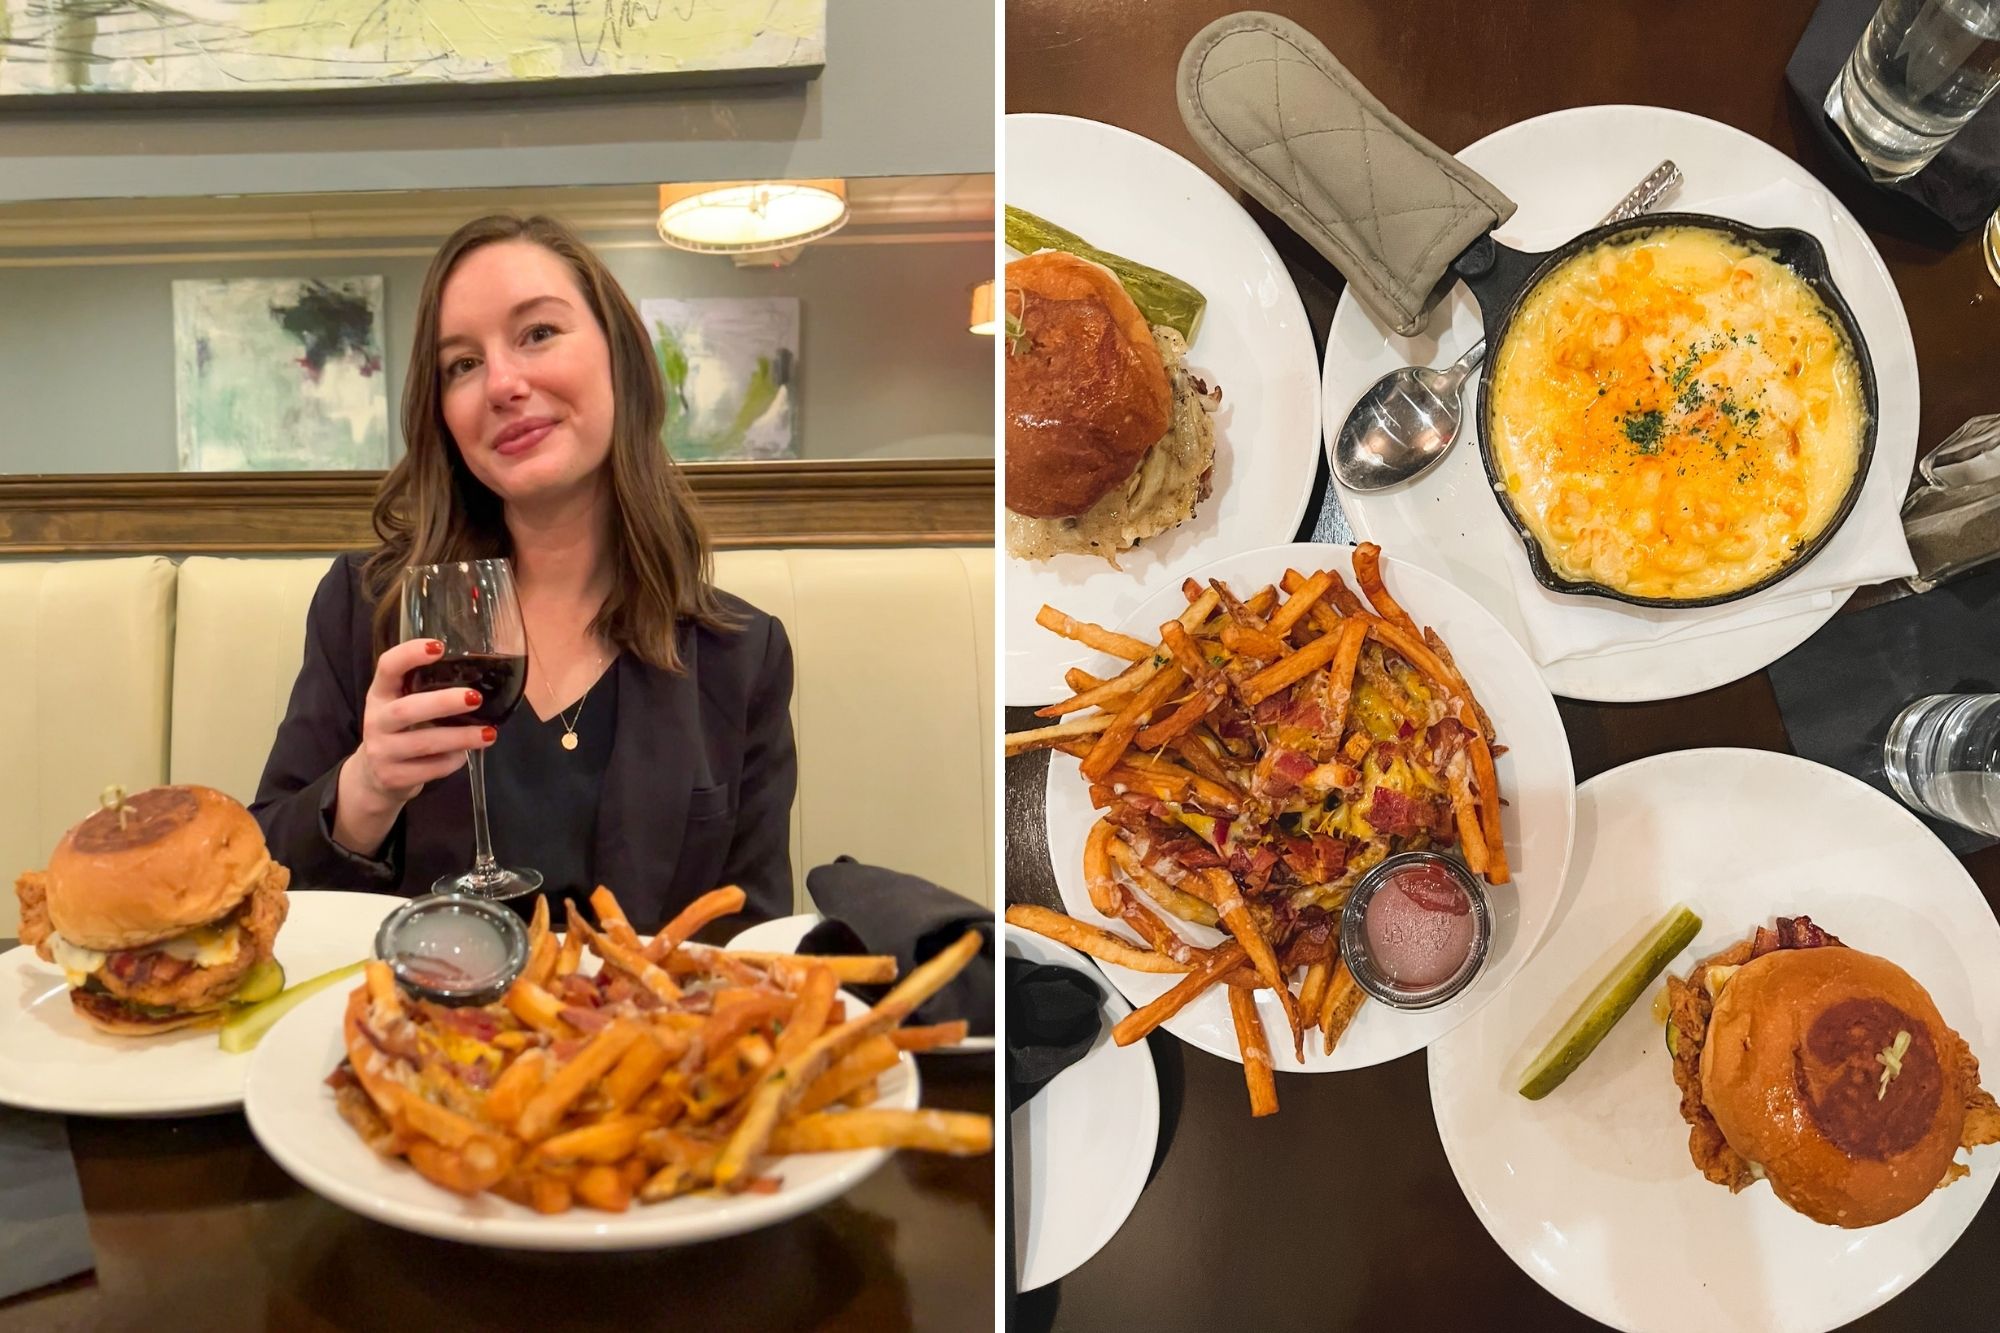 Two images: Alyssa with a glass of wine and a chicken sandwich with fries; An overhead shot of the meal